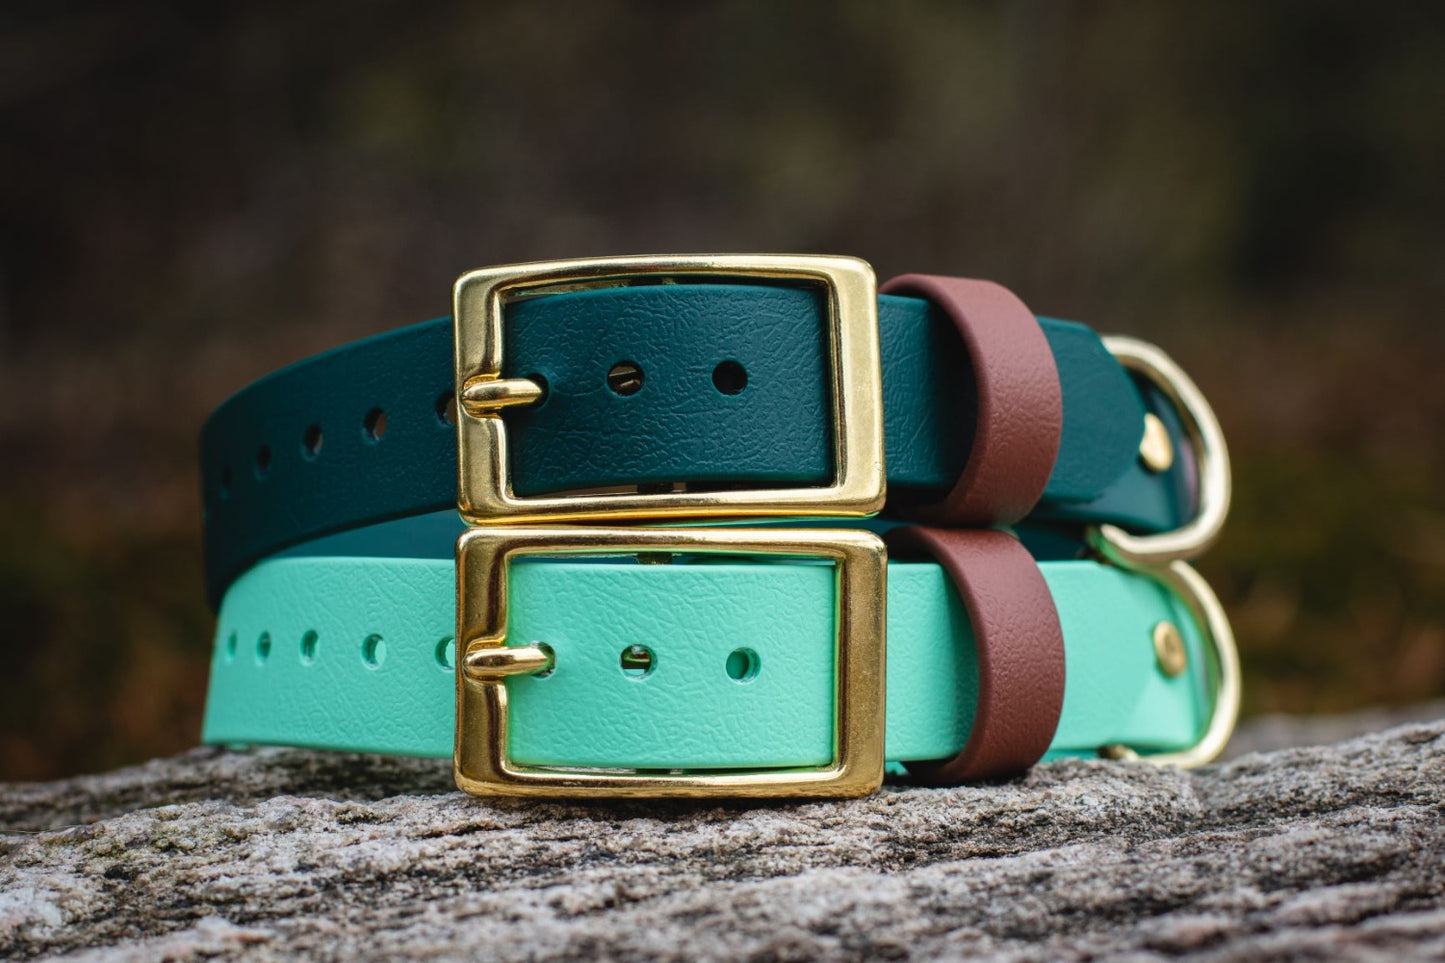 Backwoods Dog 1" BioThane Brass buckle dog collars in forest green and mint green